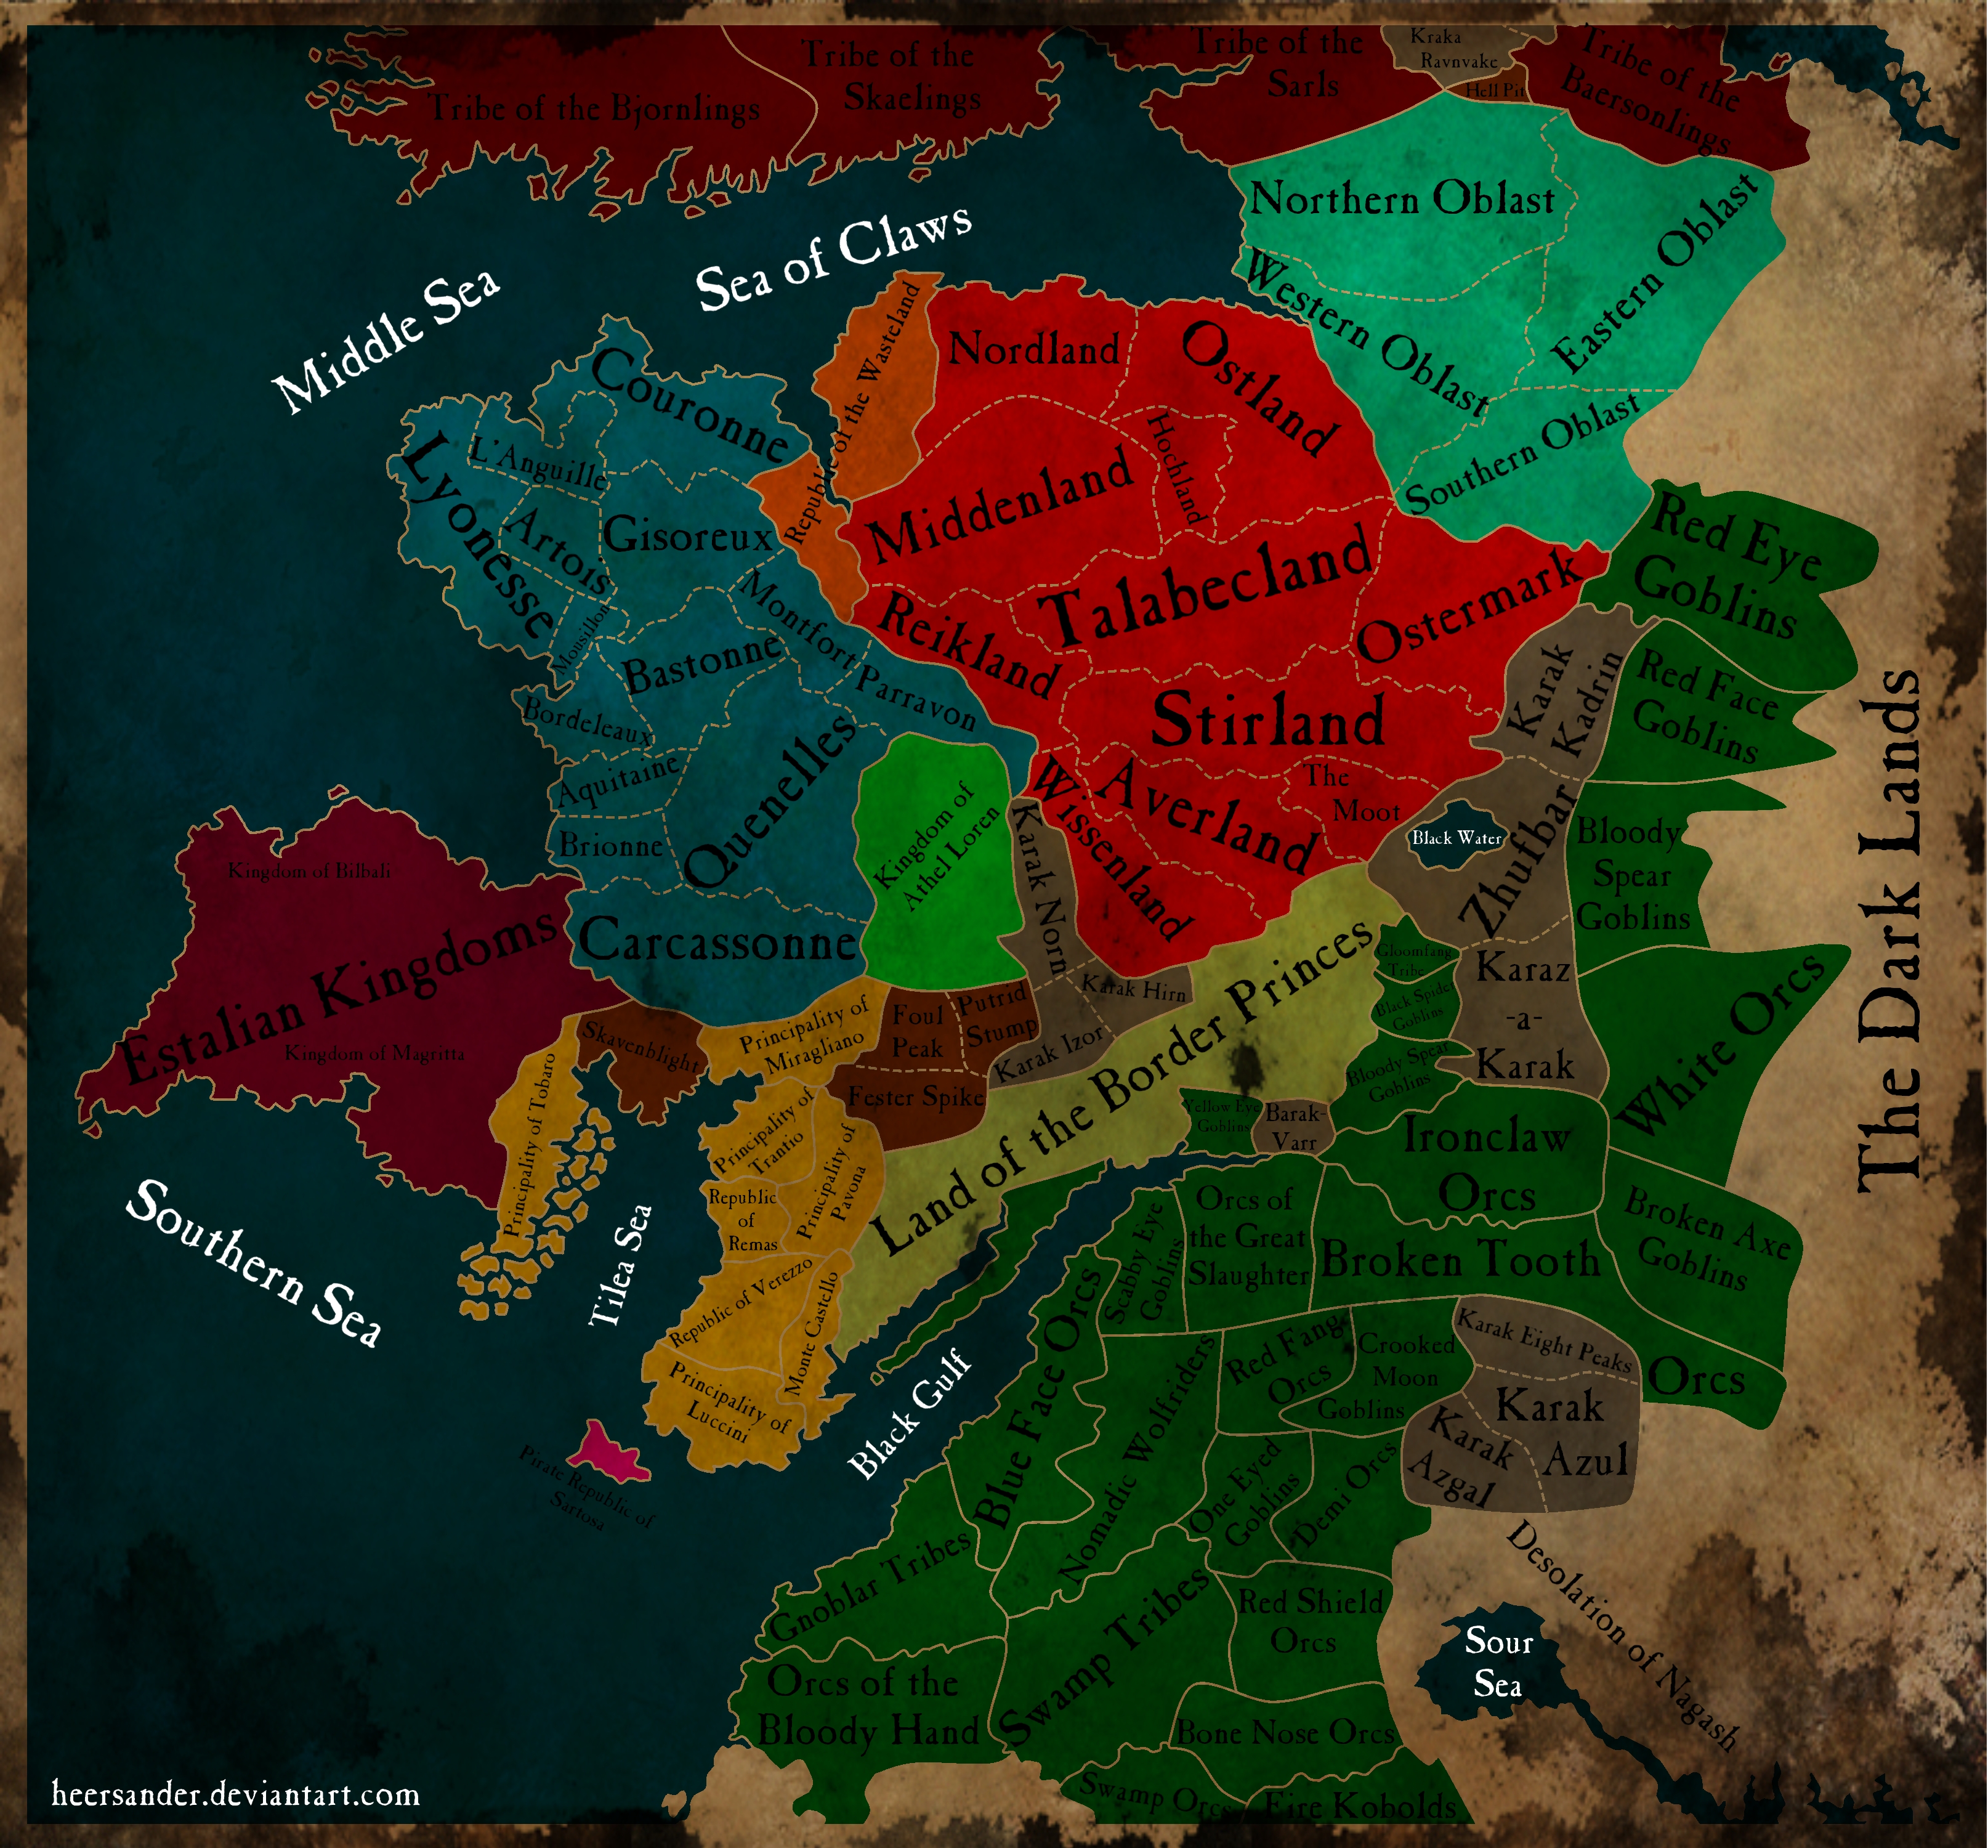 warhammer___political_map_of_the_old_world_by_heersander-d4ob7e7.jpg